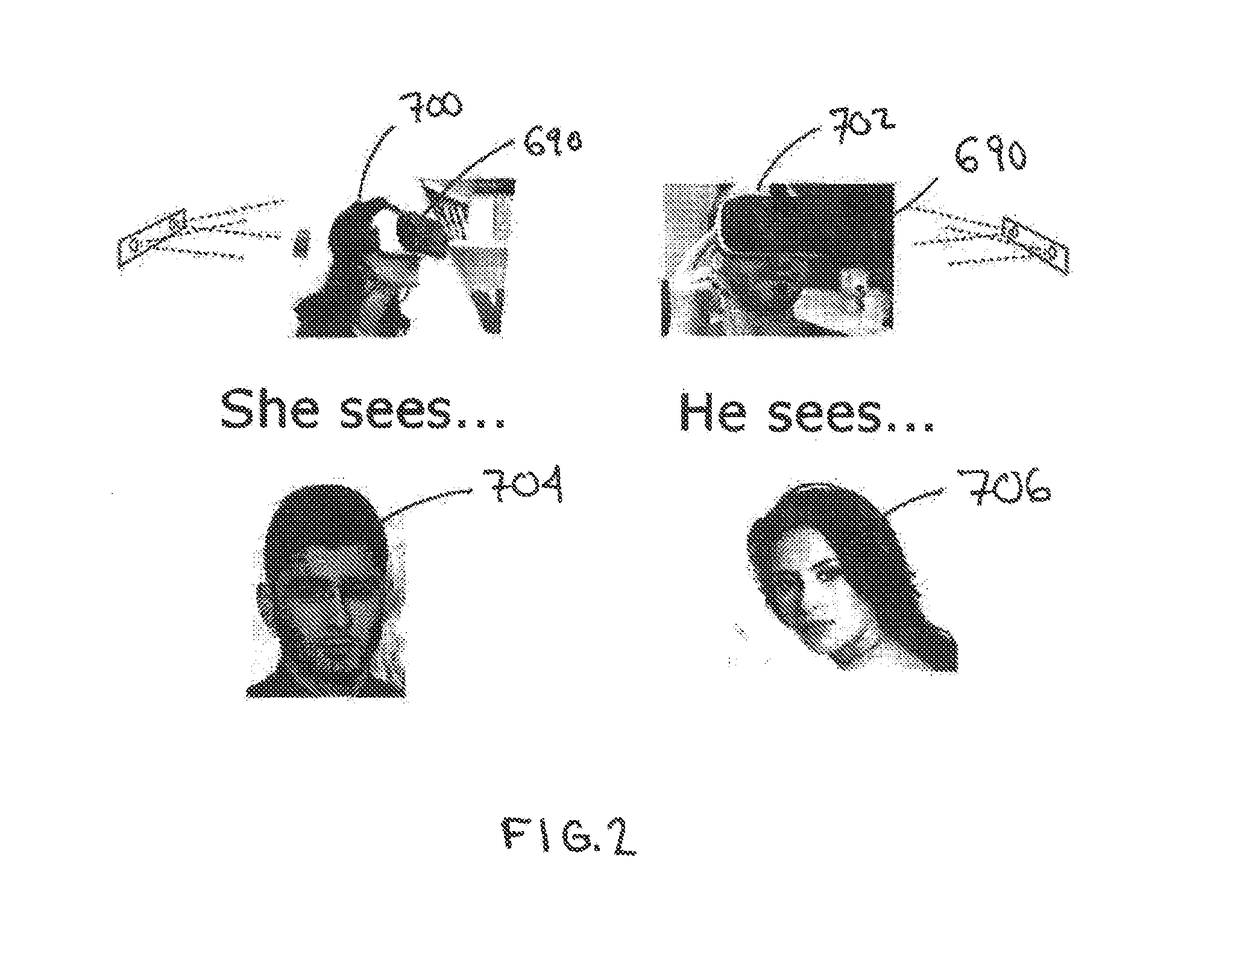 System and method for rendering virtual reality interactions